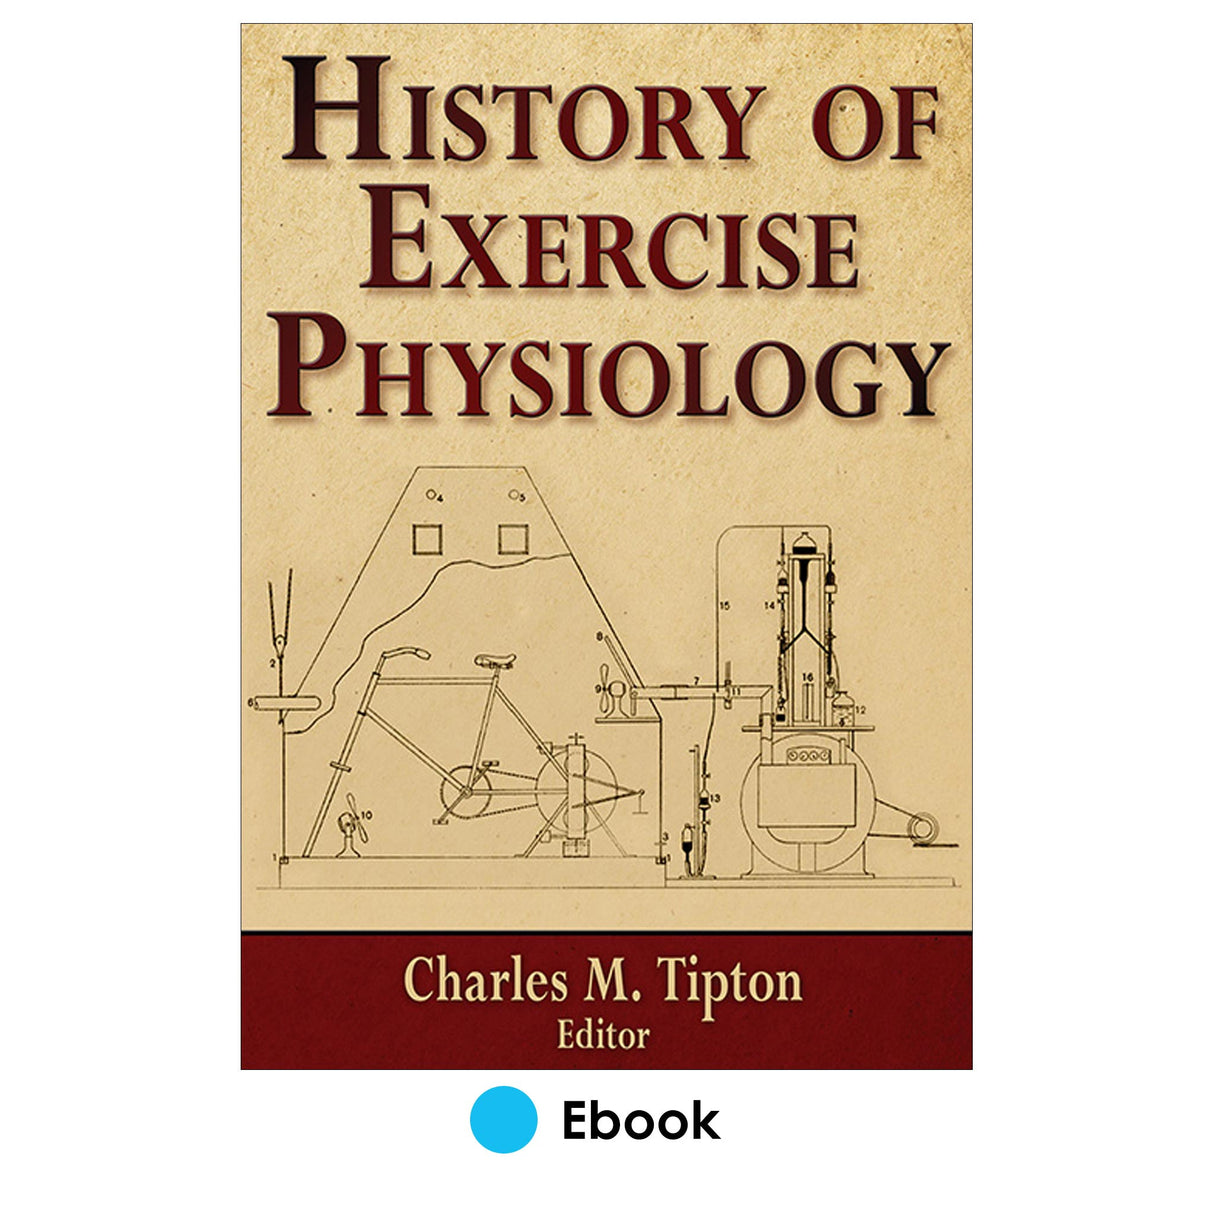 History of Exercise Physiology PDF